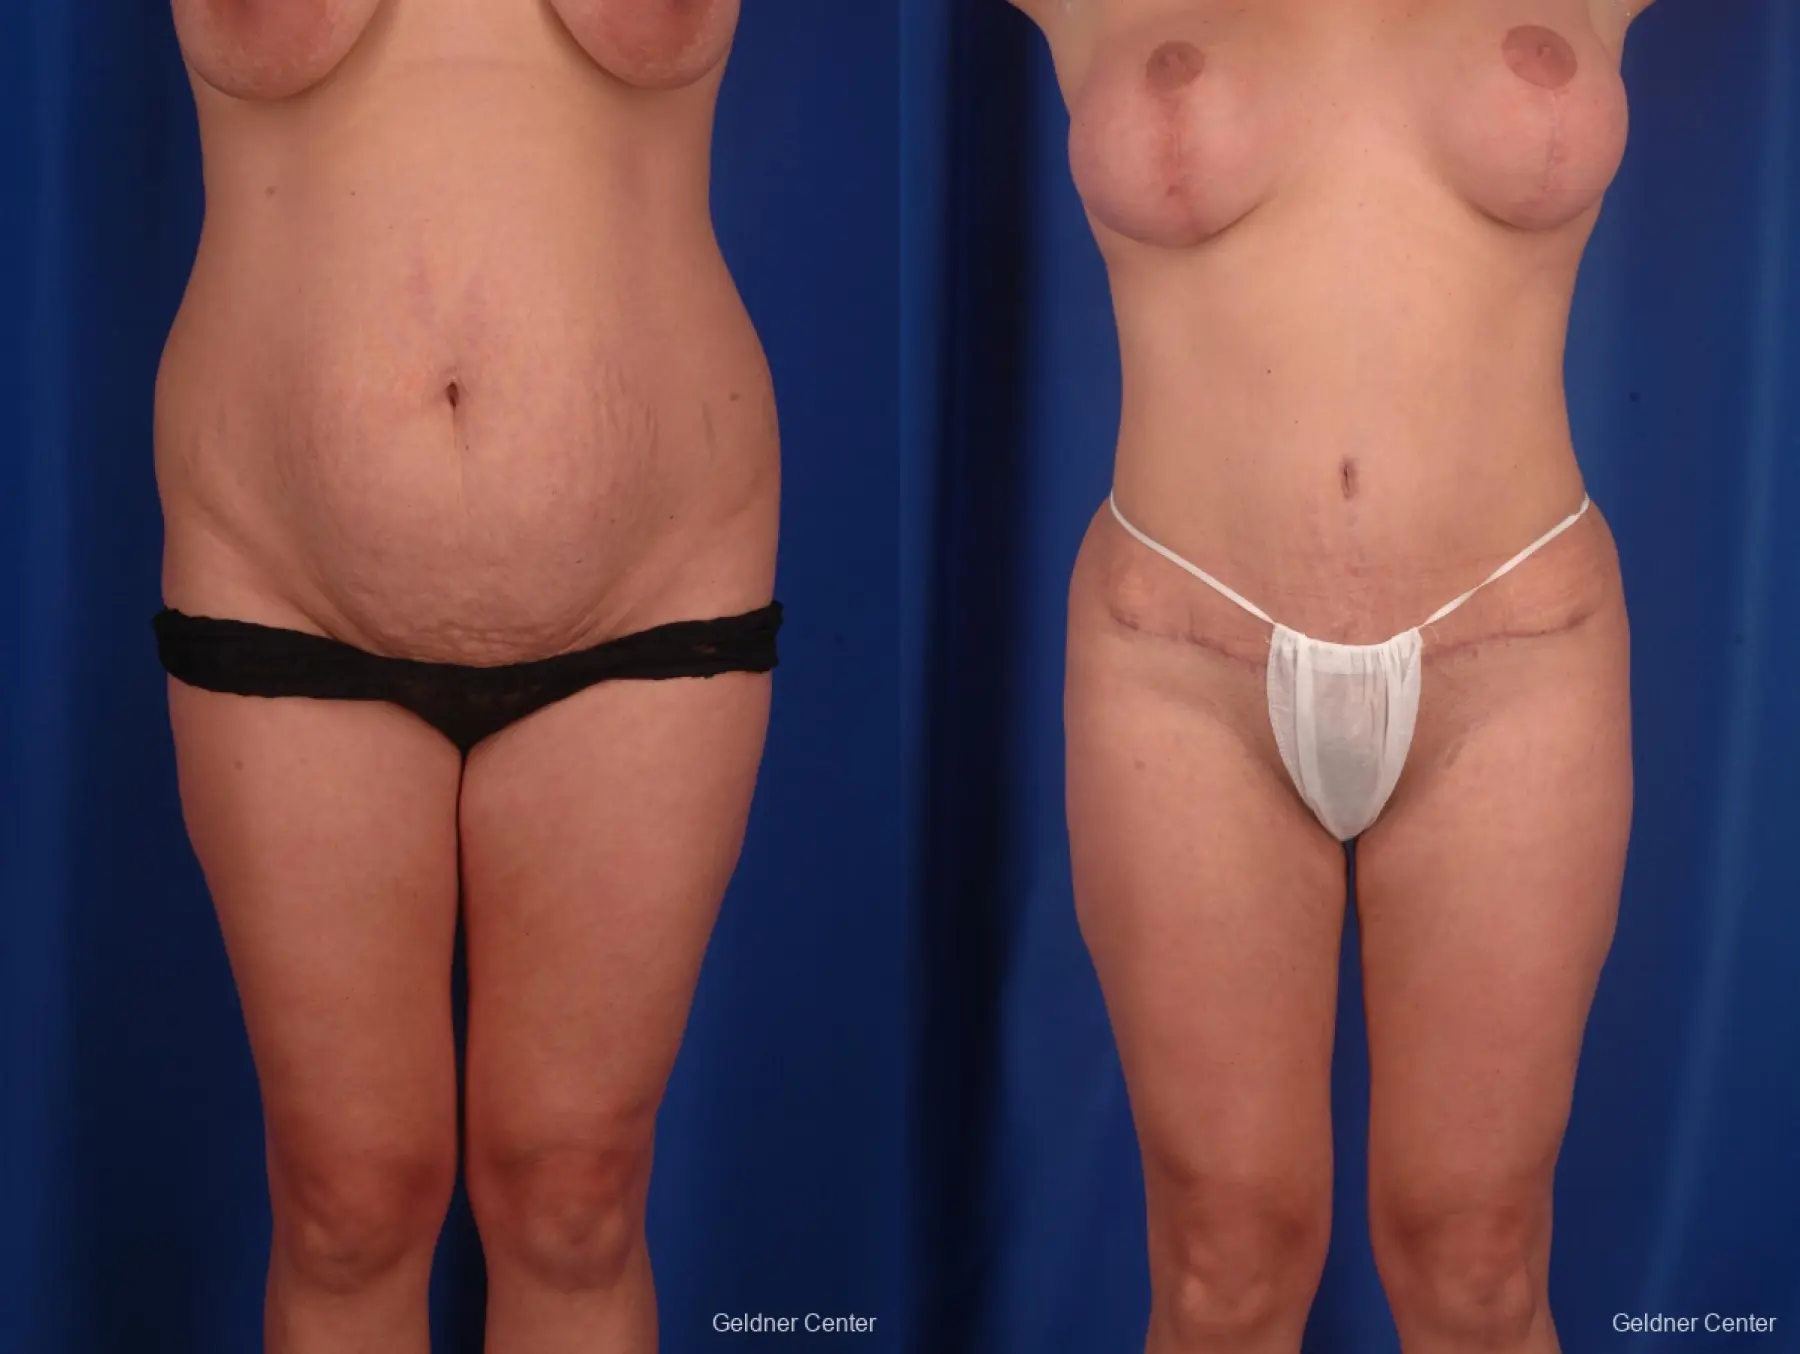 Lipoabdominoplasty: Patient 1 - Before and After 1